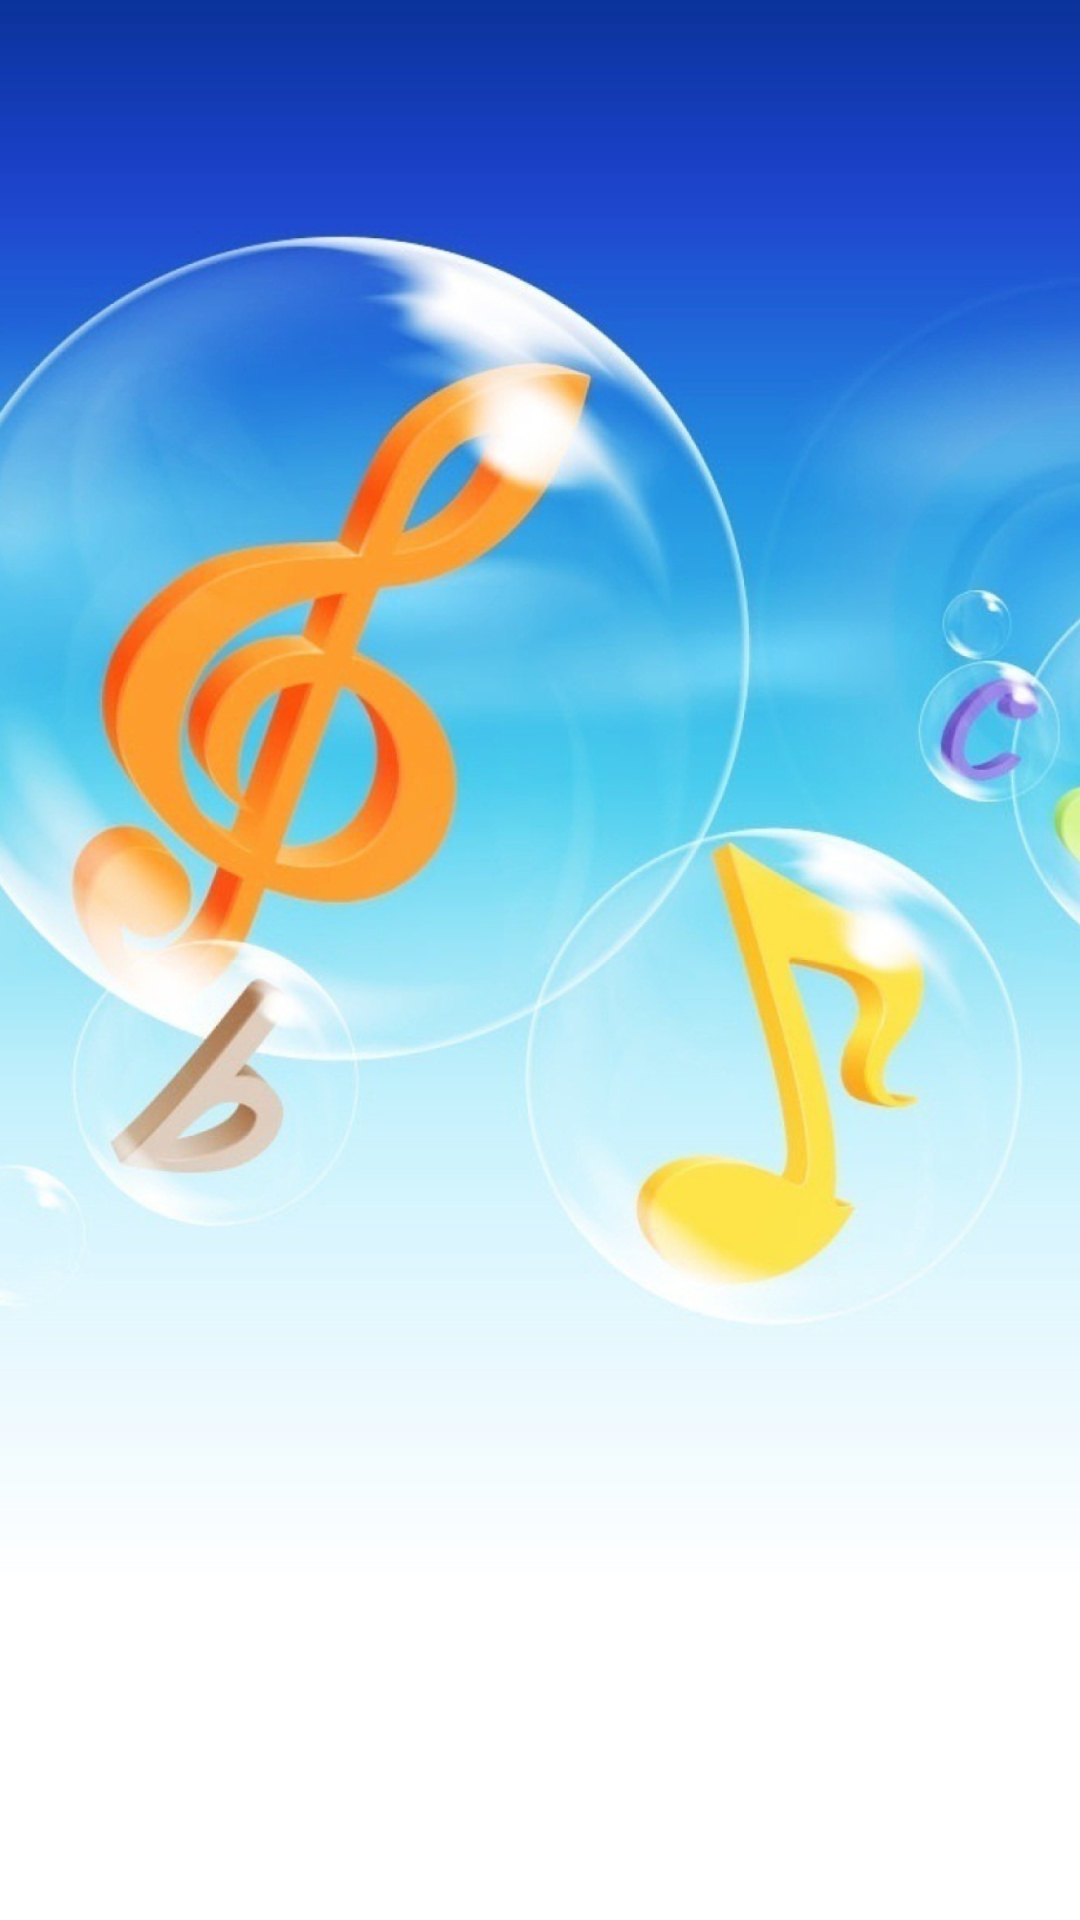 Musical Notes In Bubbles wallpaper 1080x1920